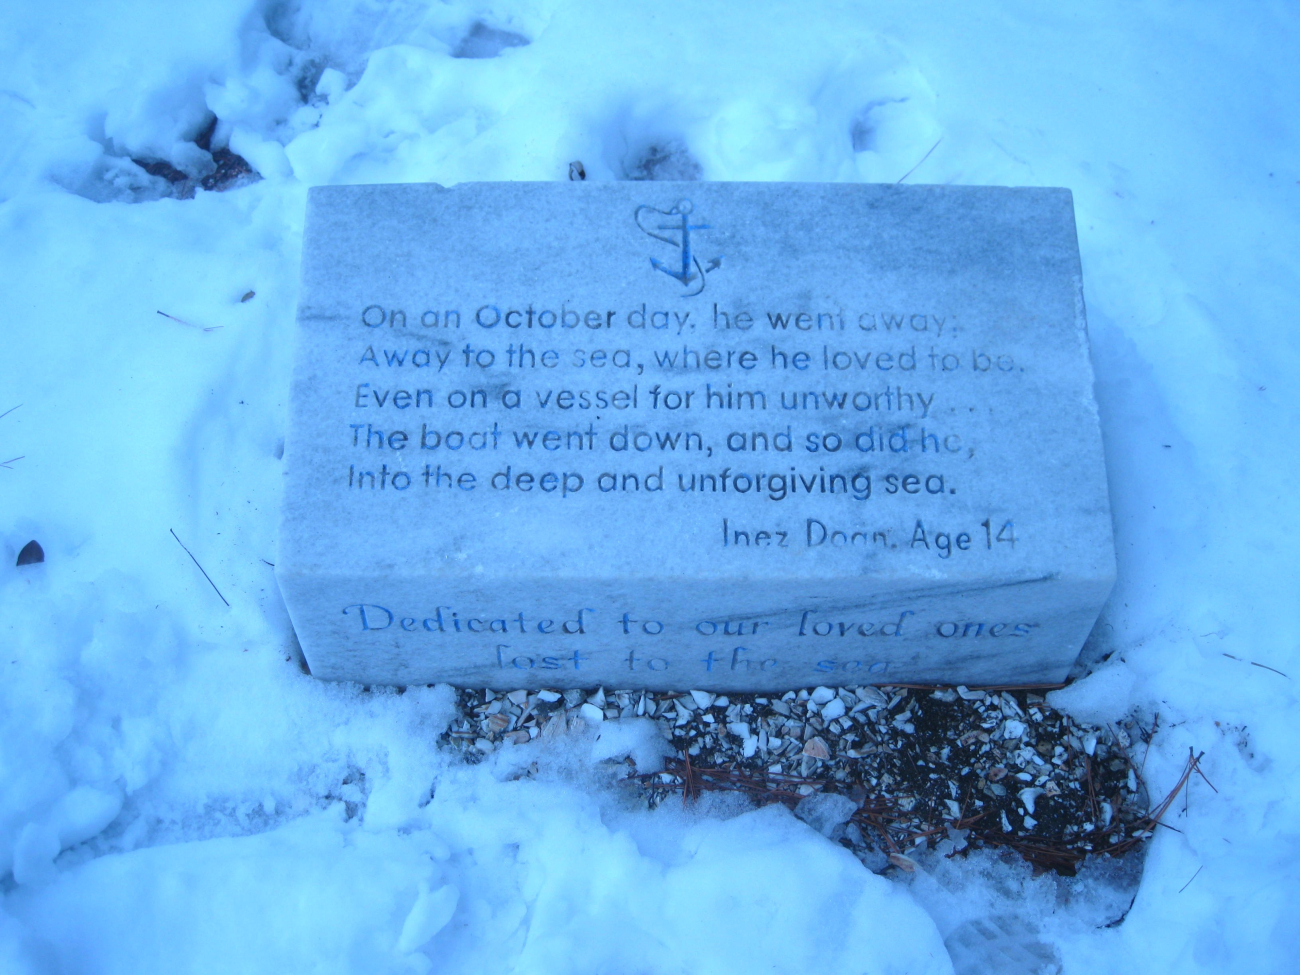 A heartfelt poem to those lost at sea by Inez Doan inscribed on stone atAssateague Lighthouse